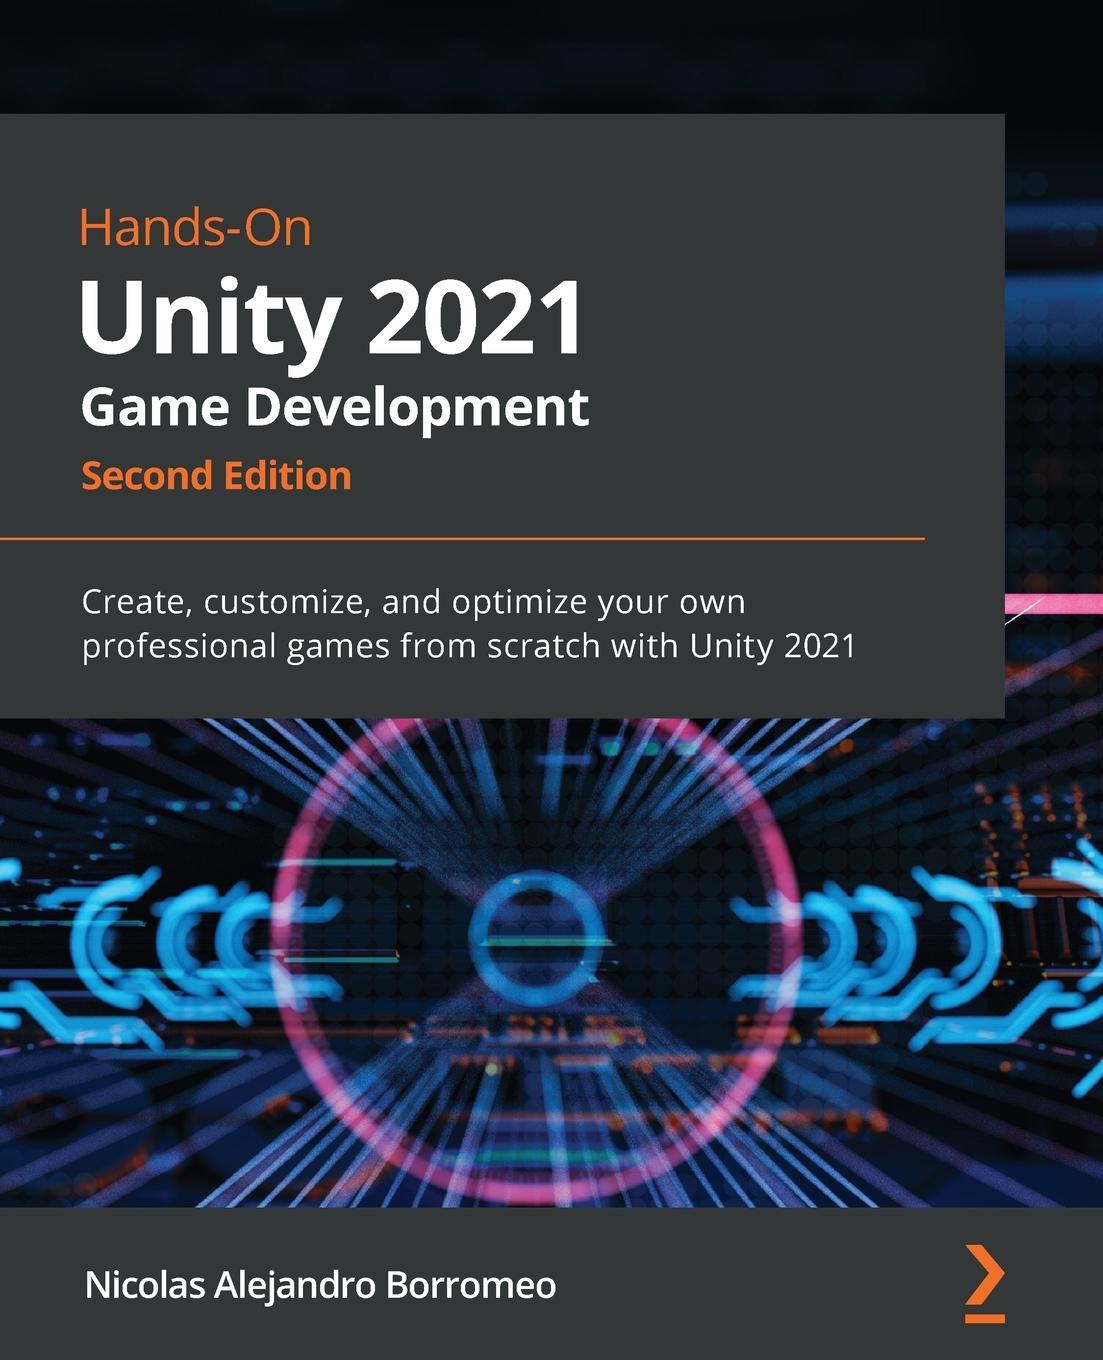 Book Hands-On Unity 2021 Game Development 